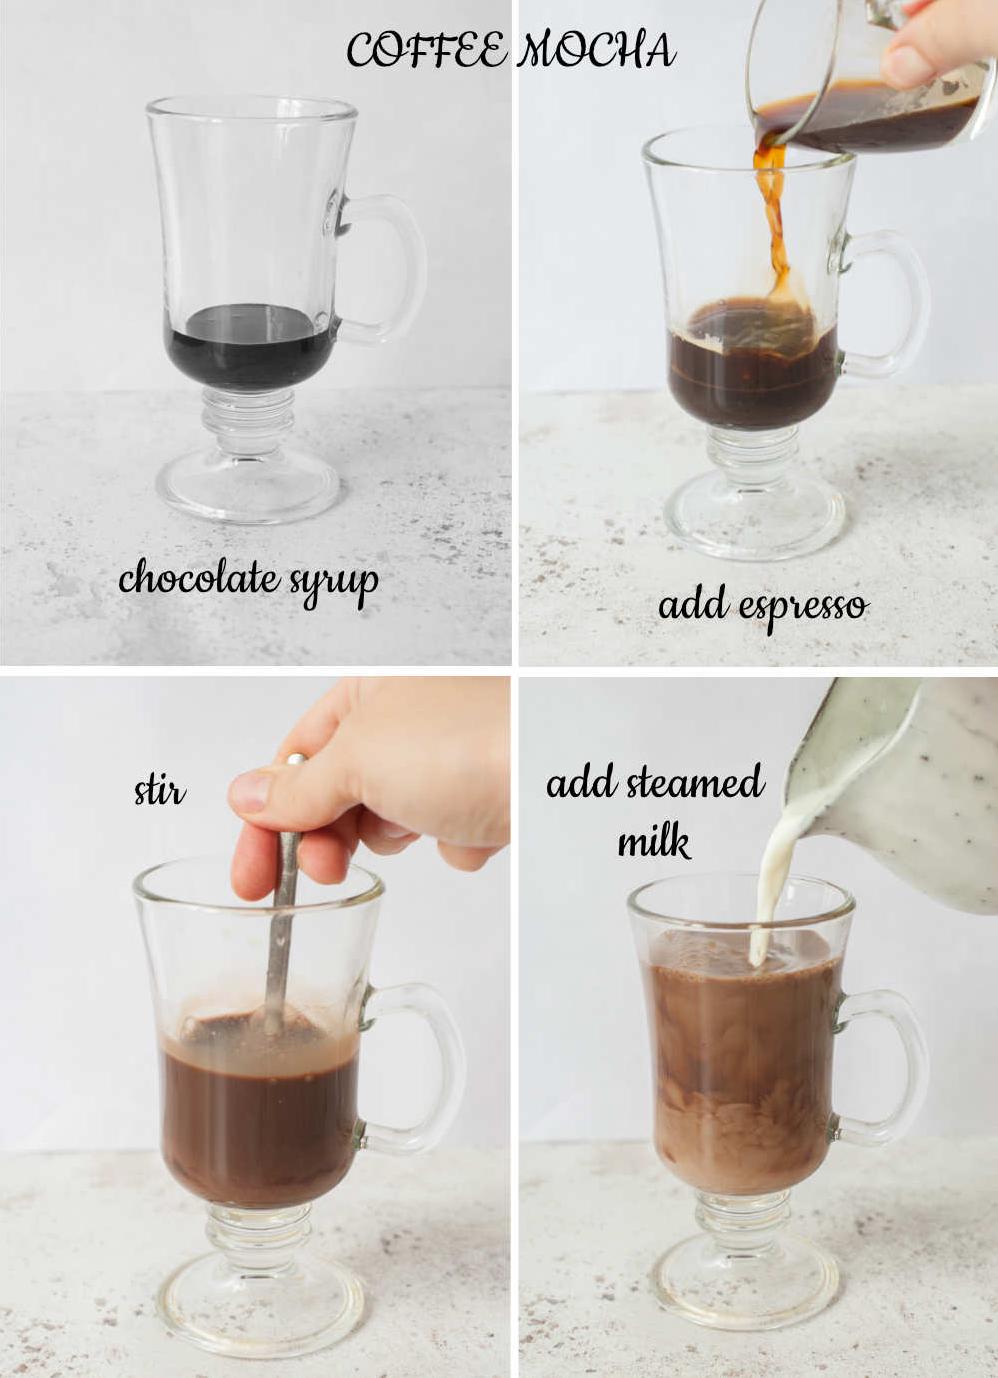  Don't let the quality of your morning coffee be compromised with this easy recipe